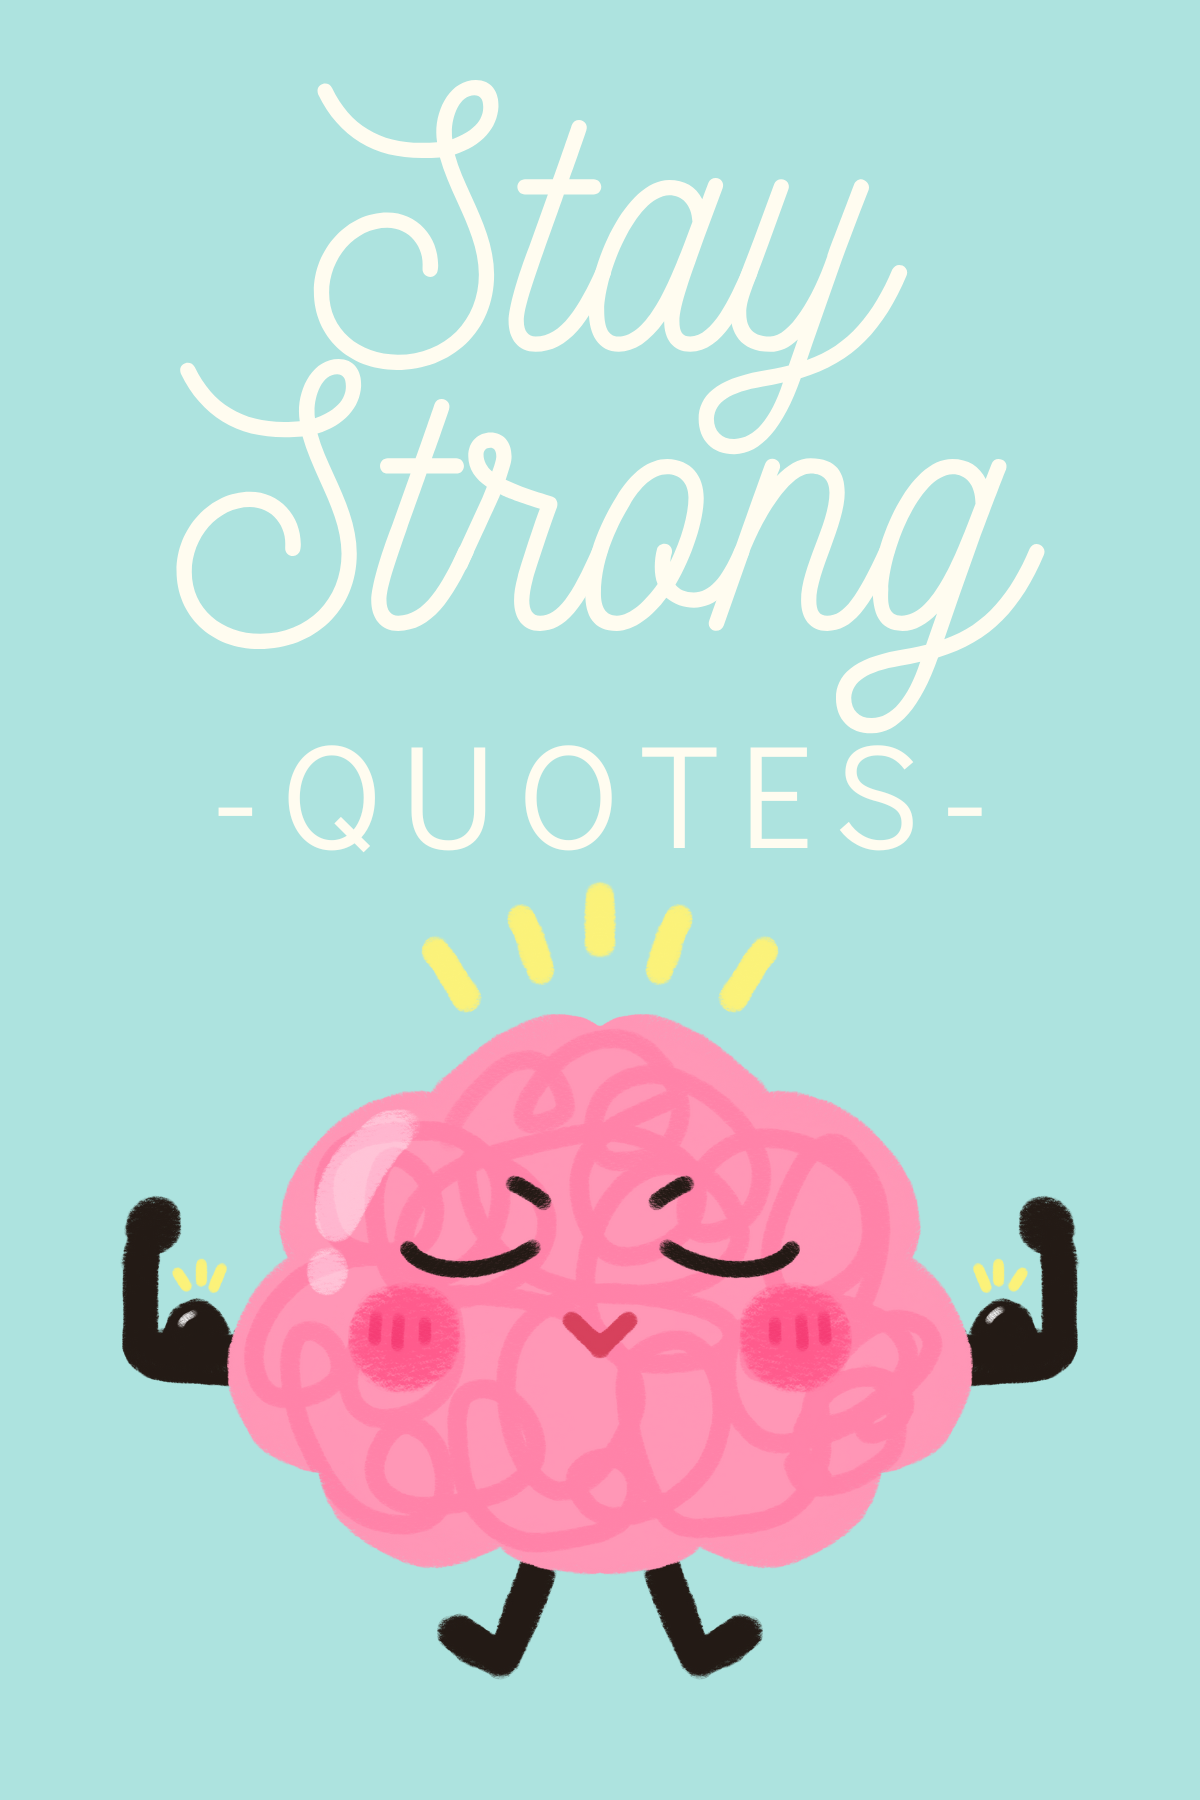 Image shows a drawing of a brain with muscly arms and legs, with text that reads stay strong quotes.